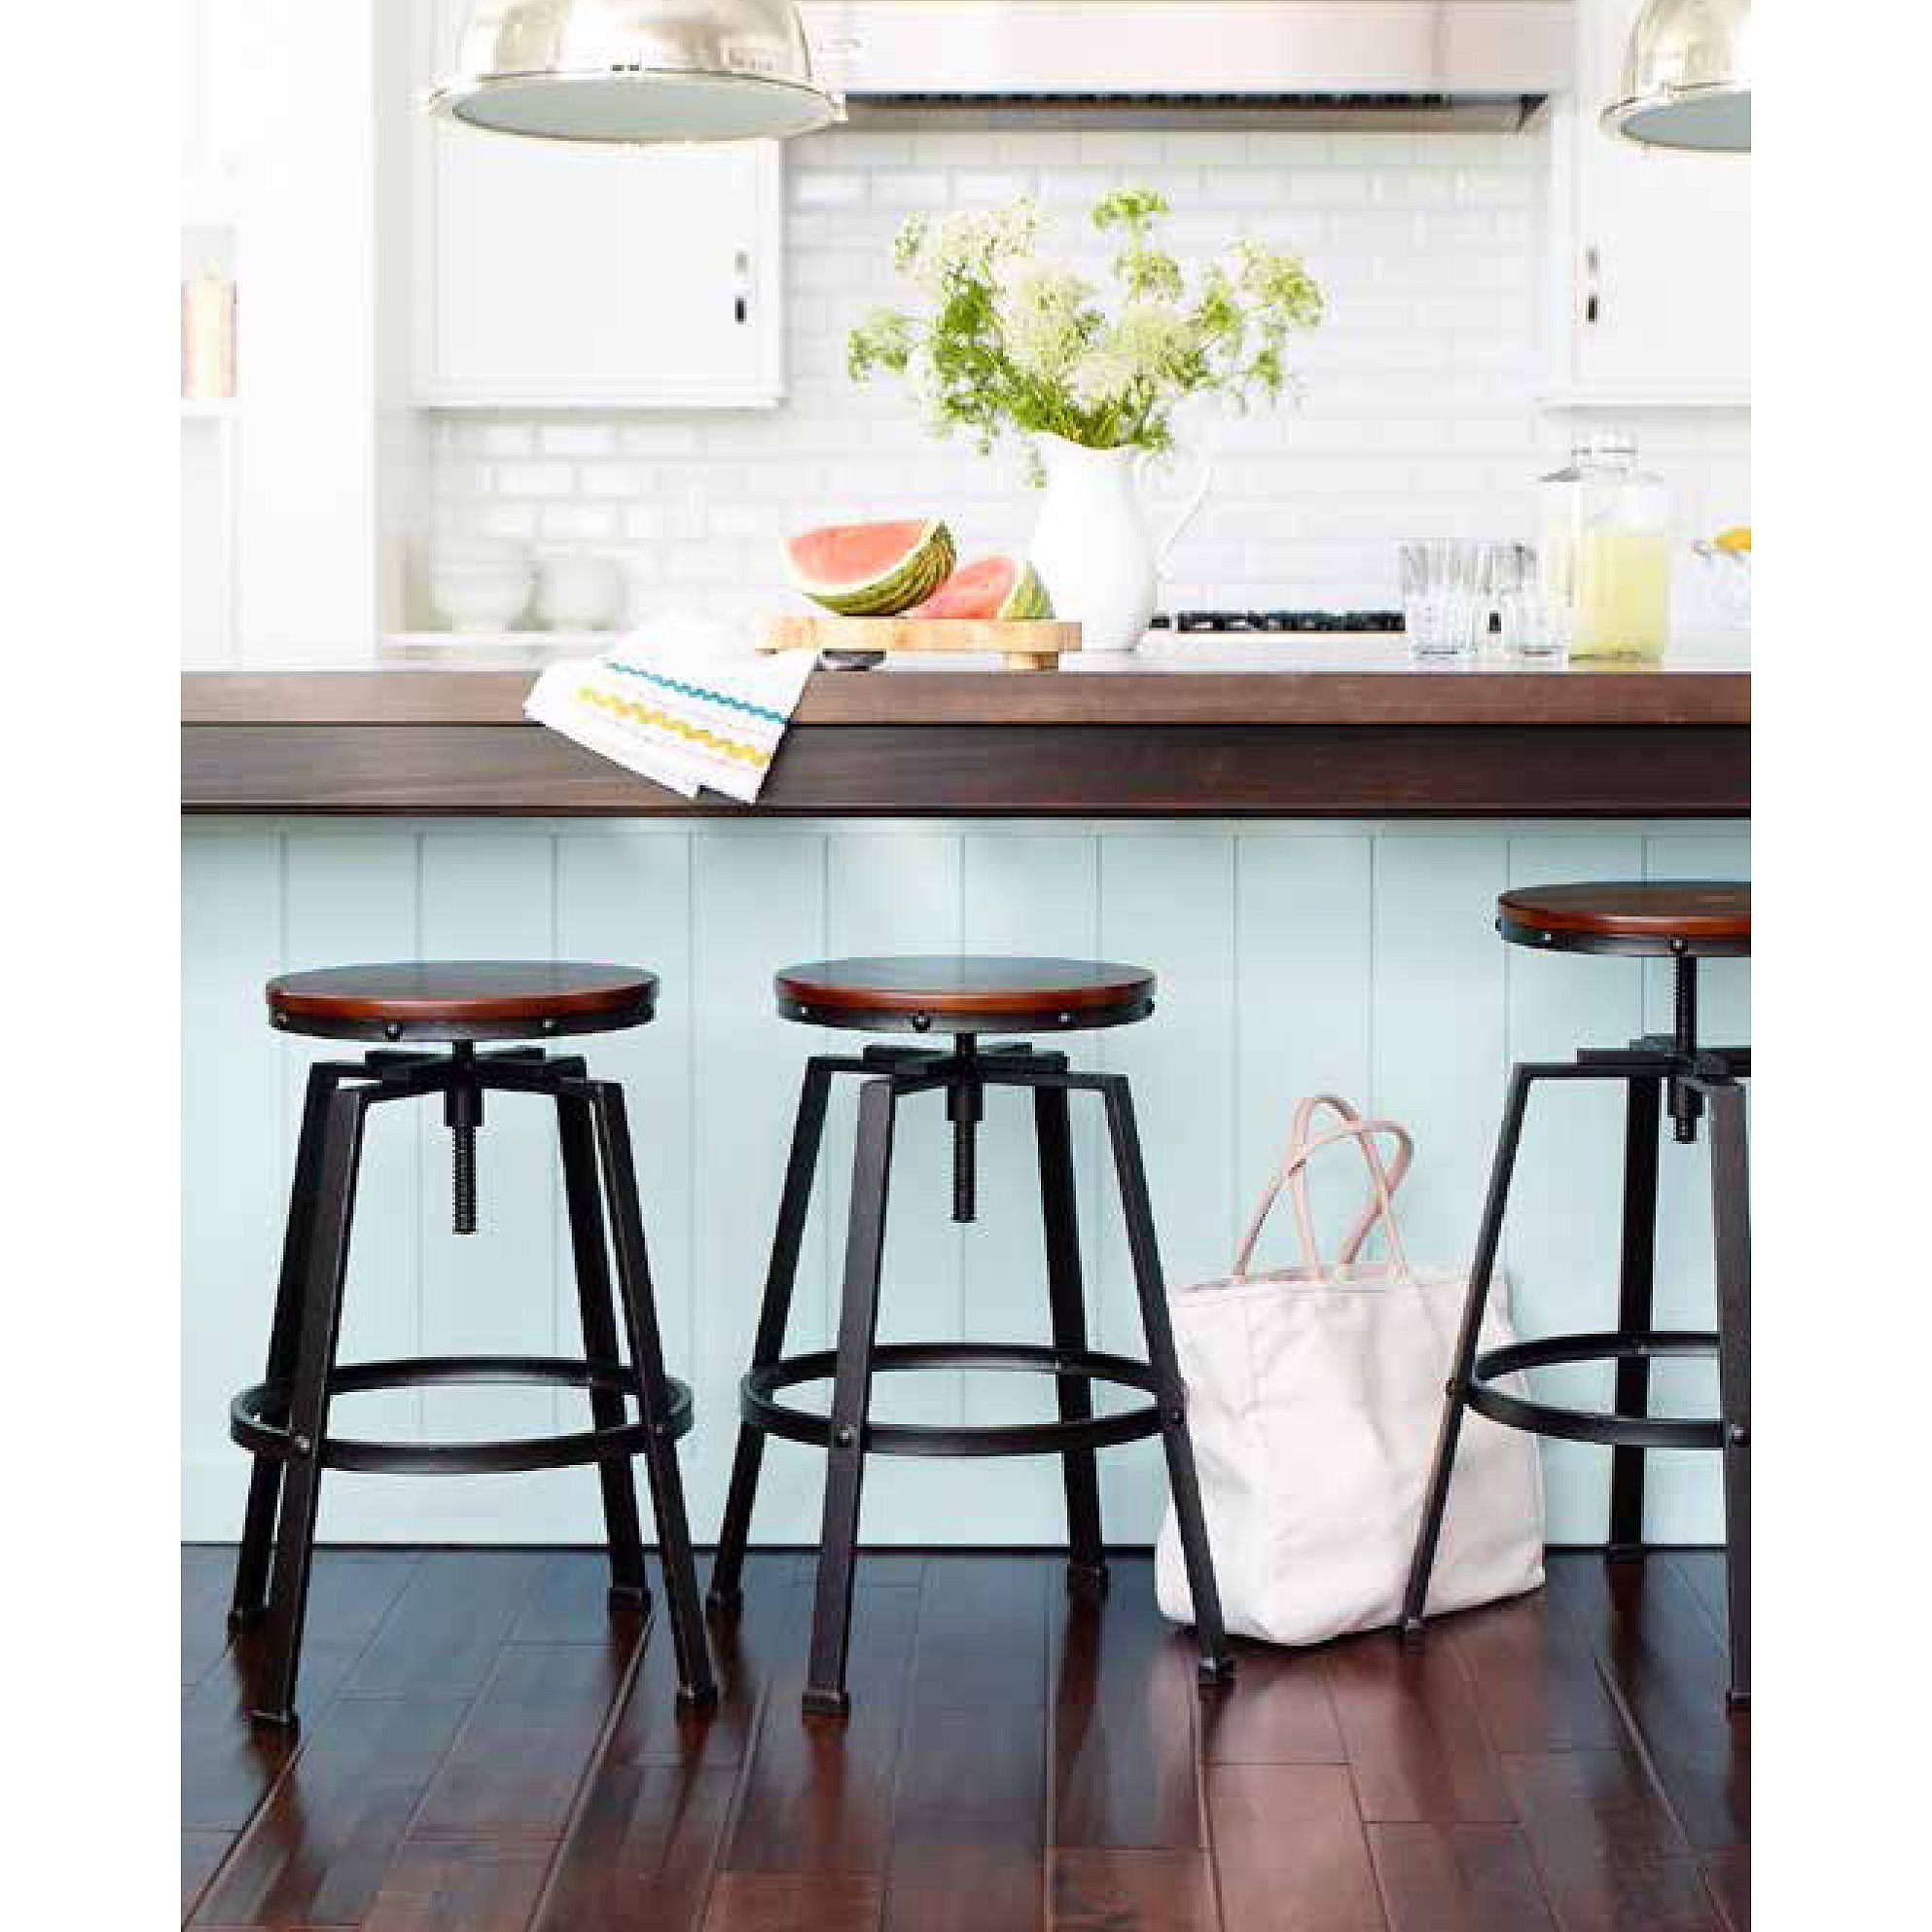 Target Small Kitchen Table
 The Lewiston Adjustable Height Swivel Stool has a modern